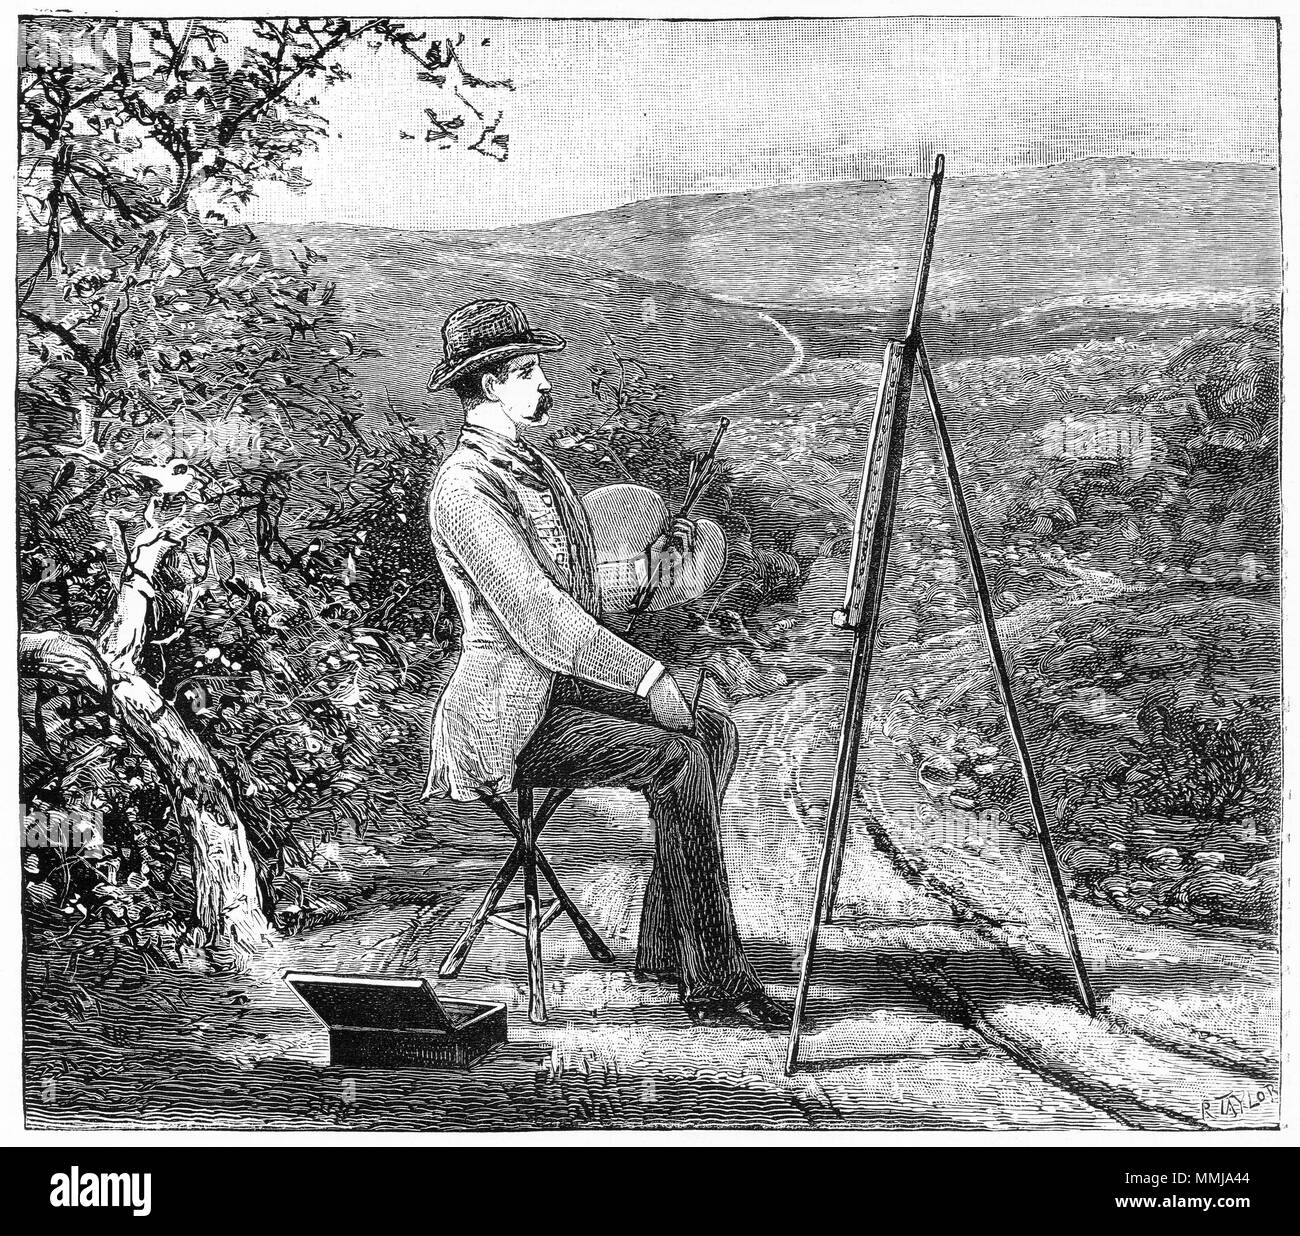 Engraving of a well-dressed artist at work on his canvas in the countryside. From an original engraving in the Girl's Own Paper magazine 1882. Stock Photo